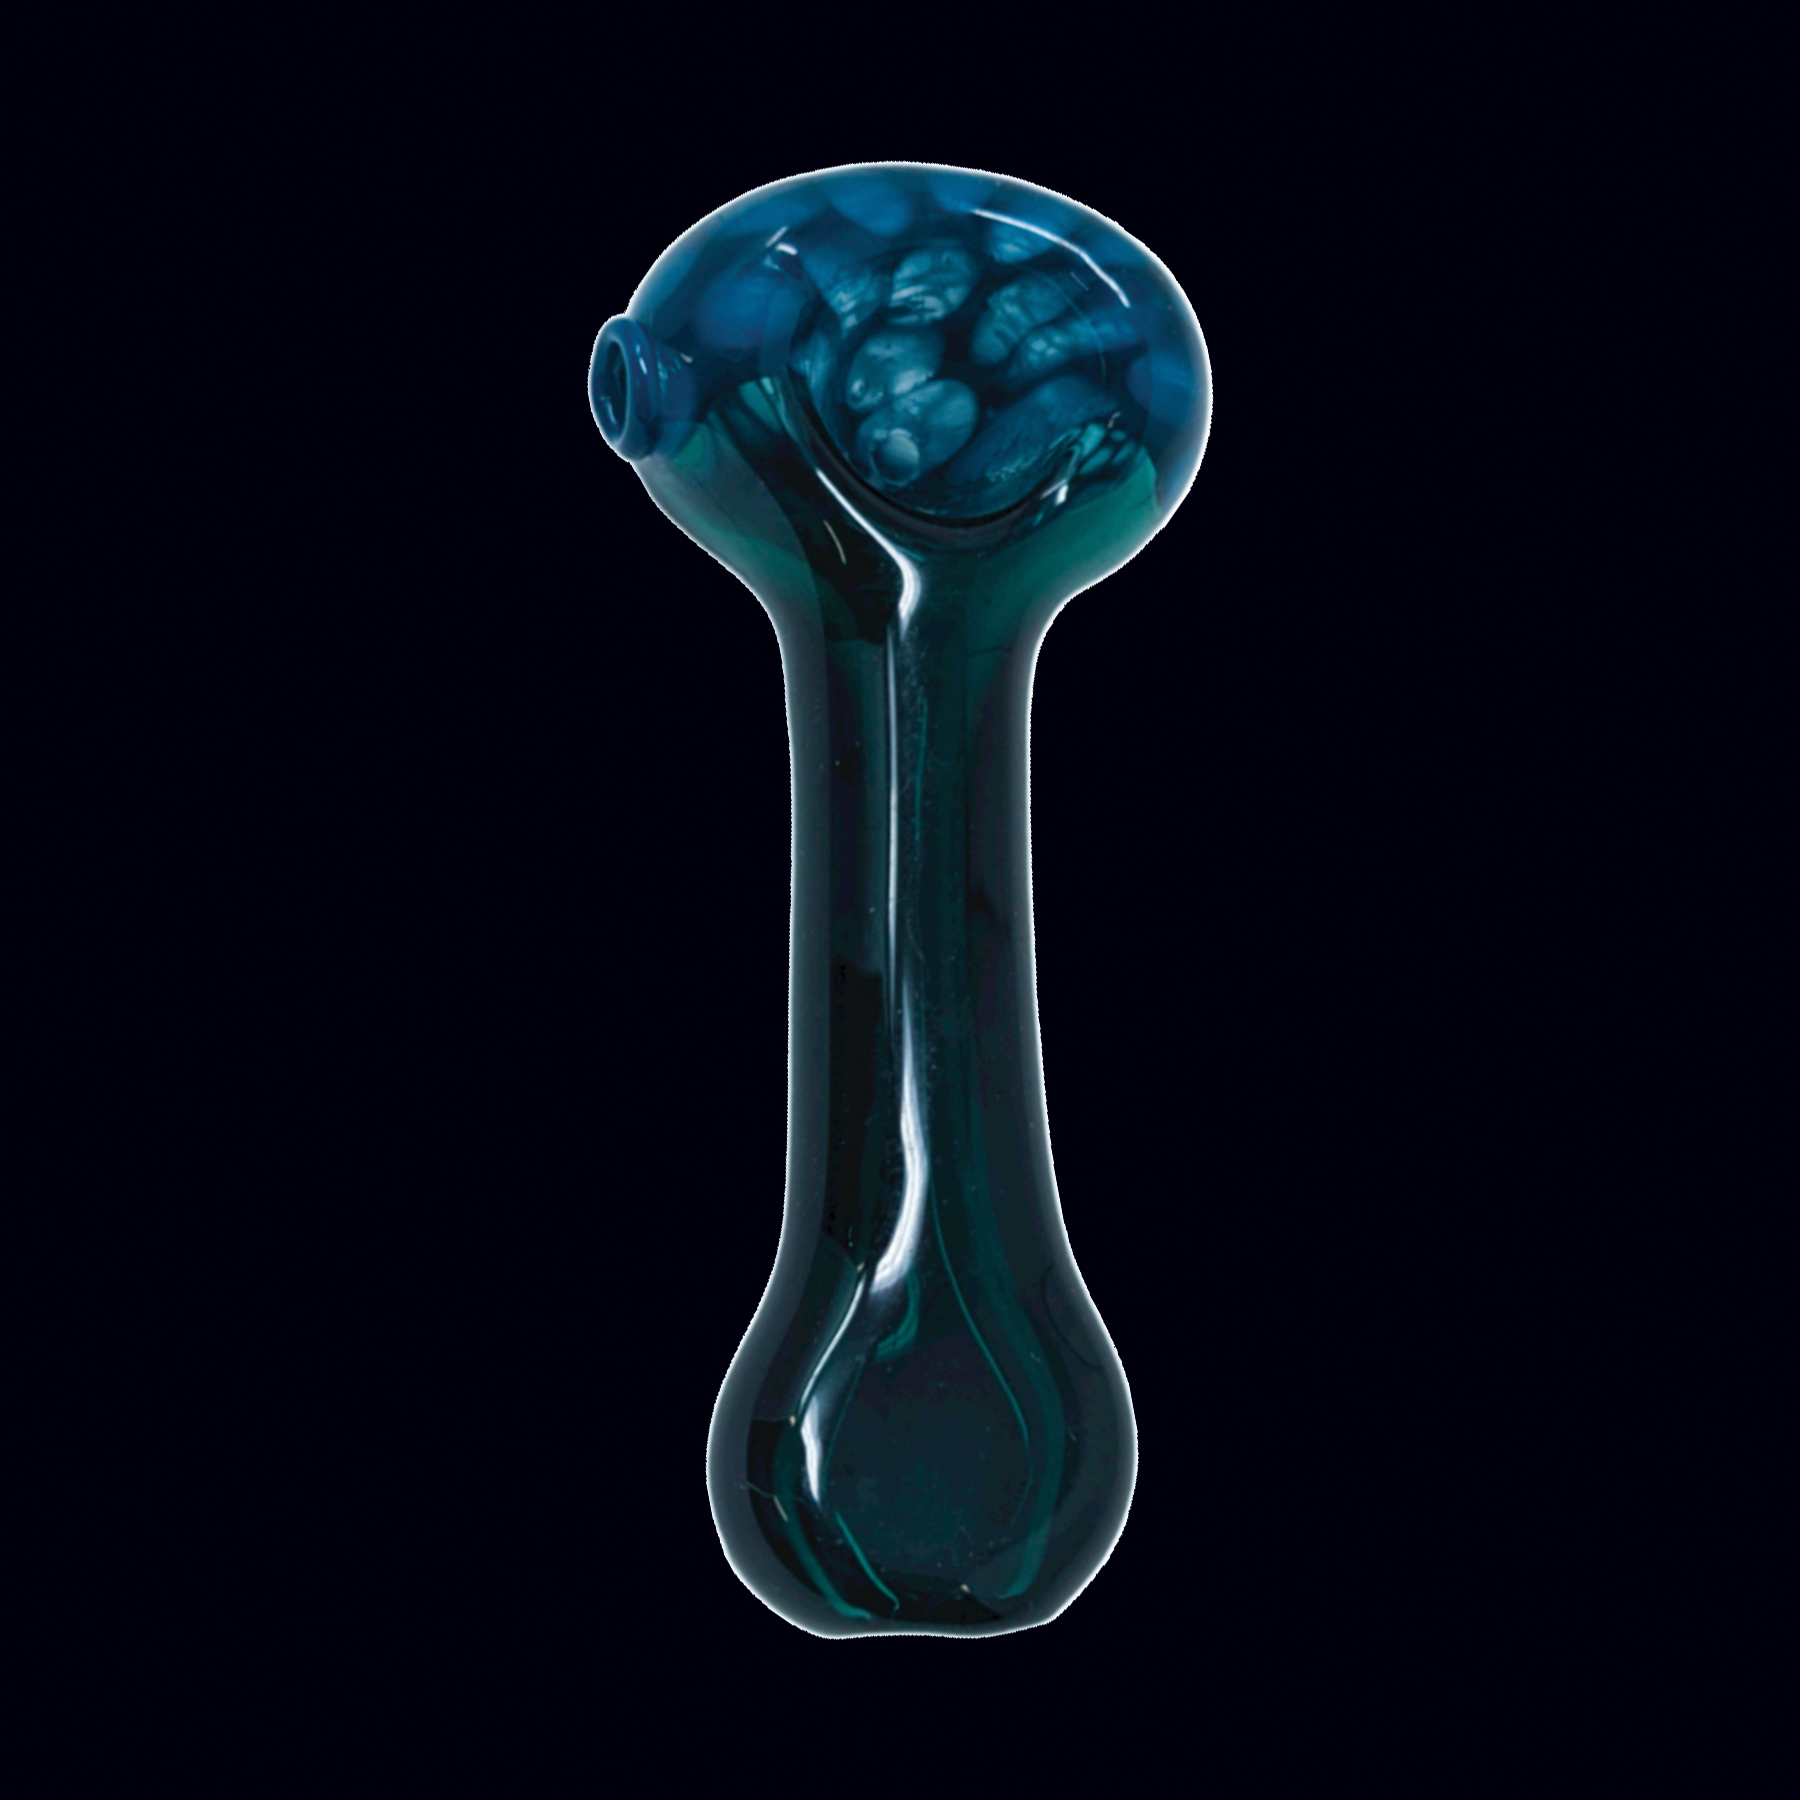 A blue glass object is shown on the black background.